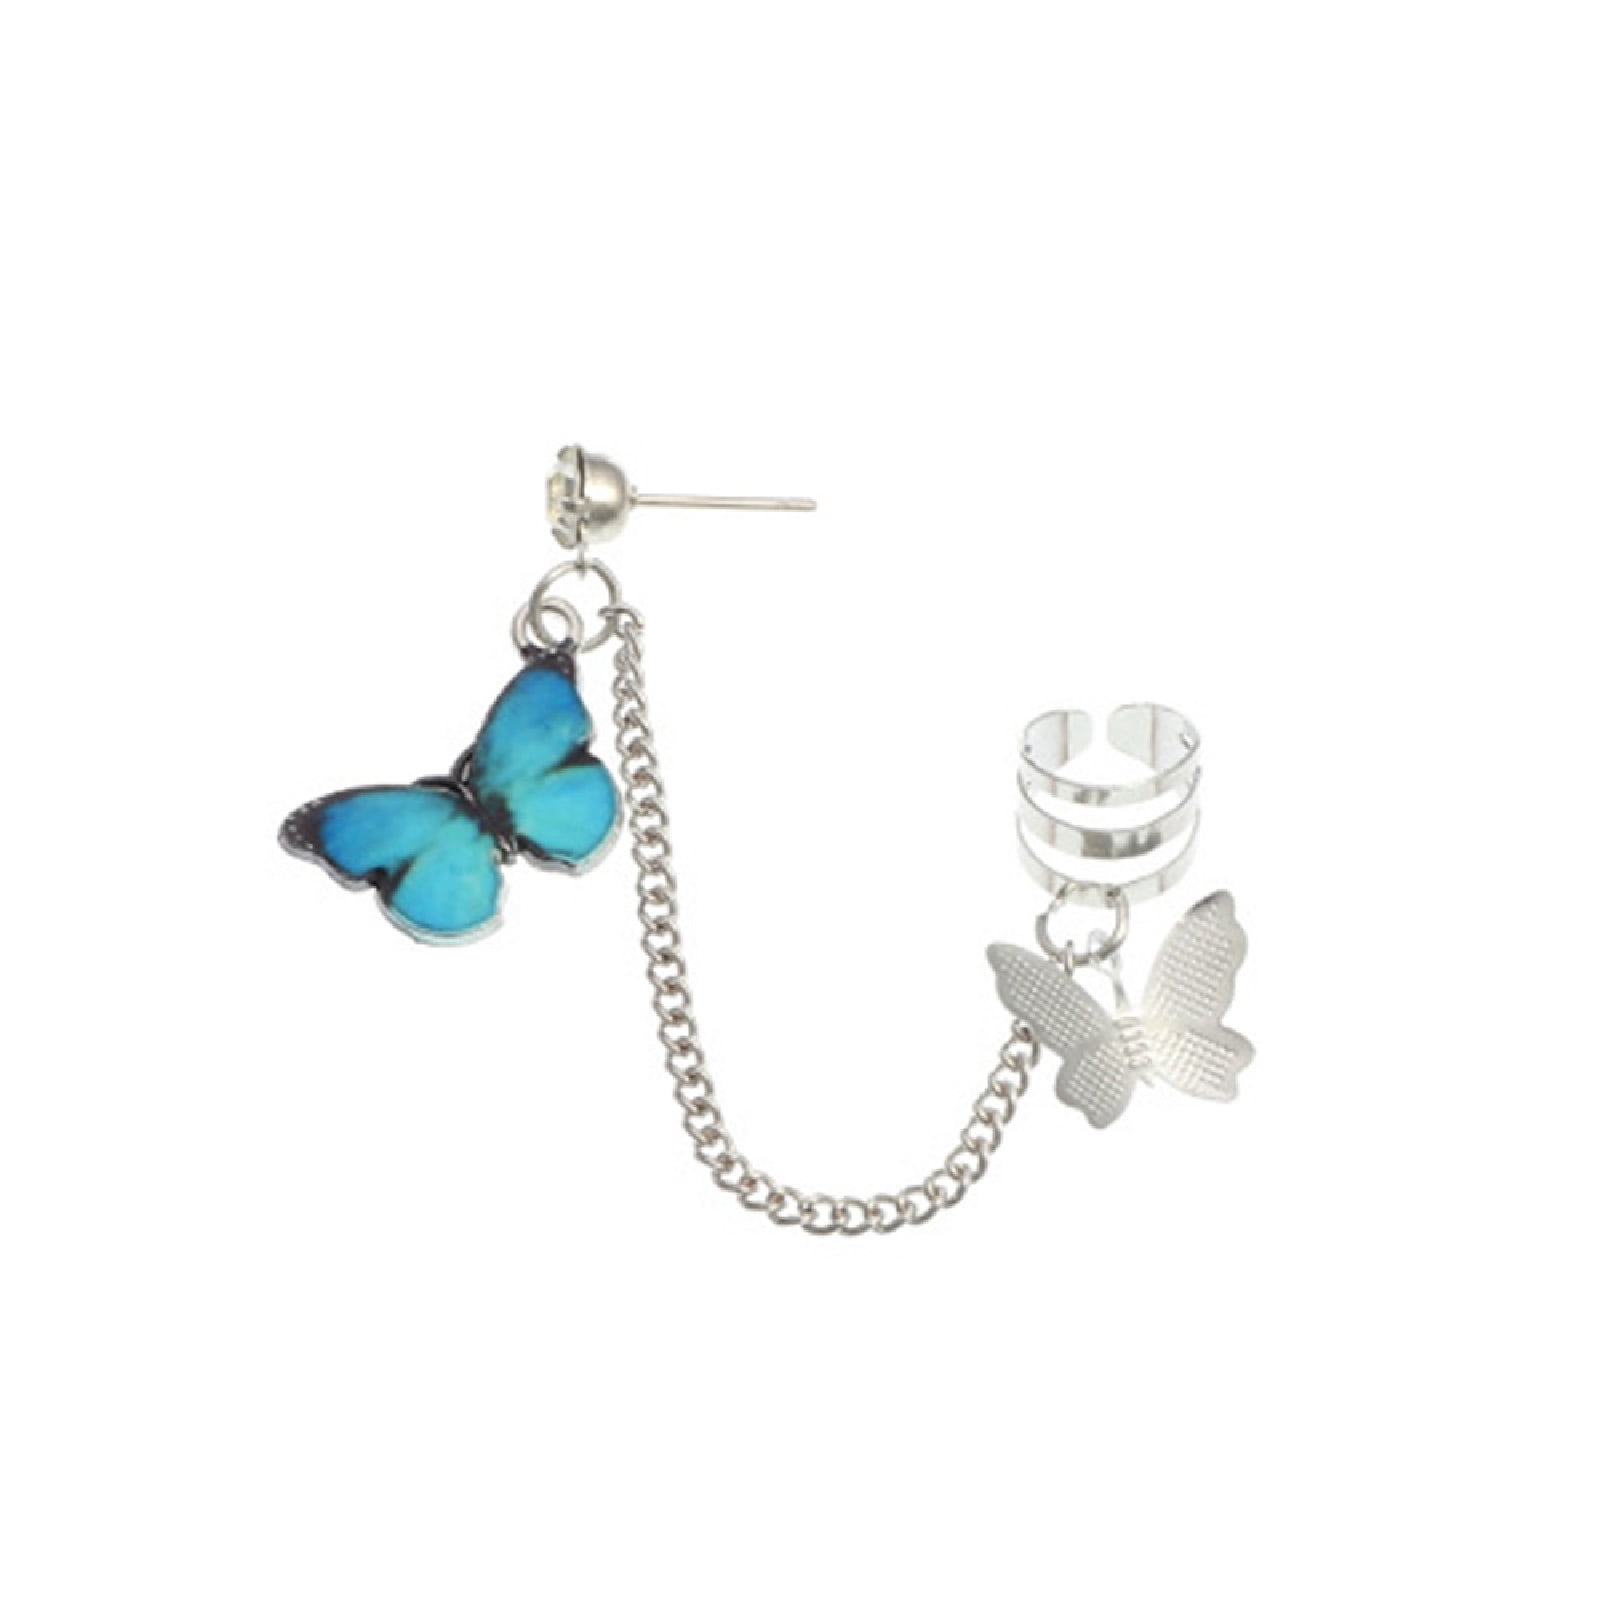 Details about   Sterling silver chain of hearts earring cuff 